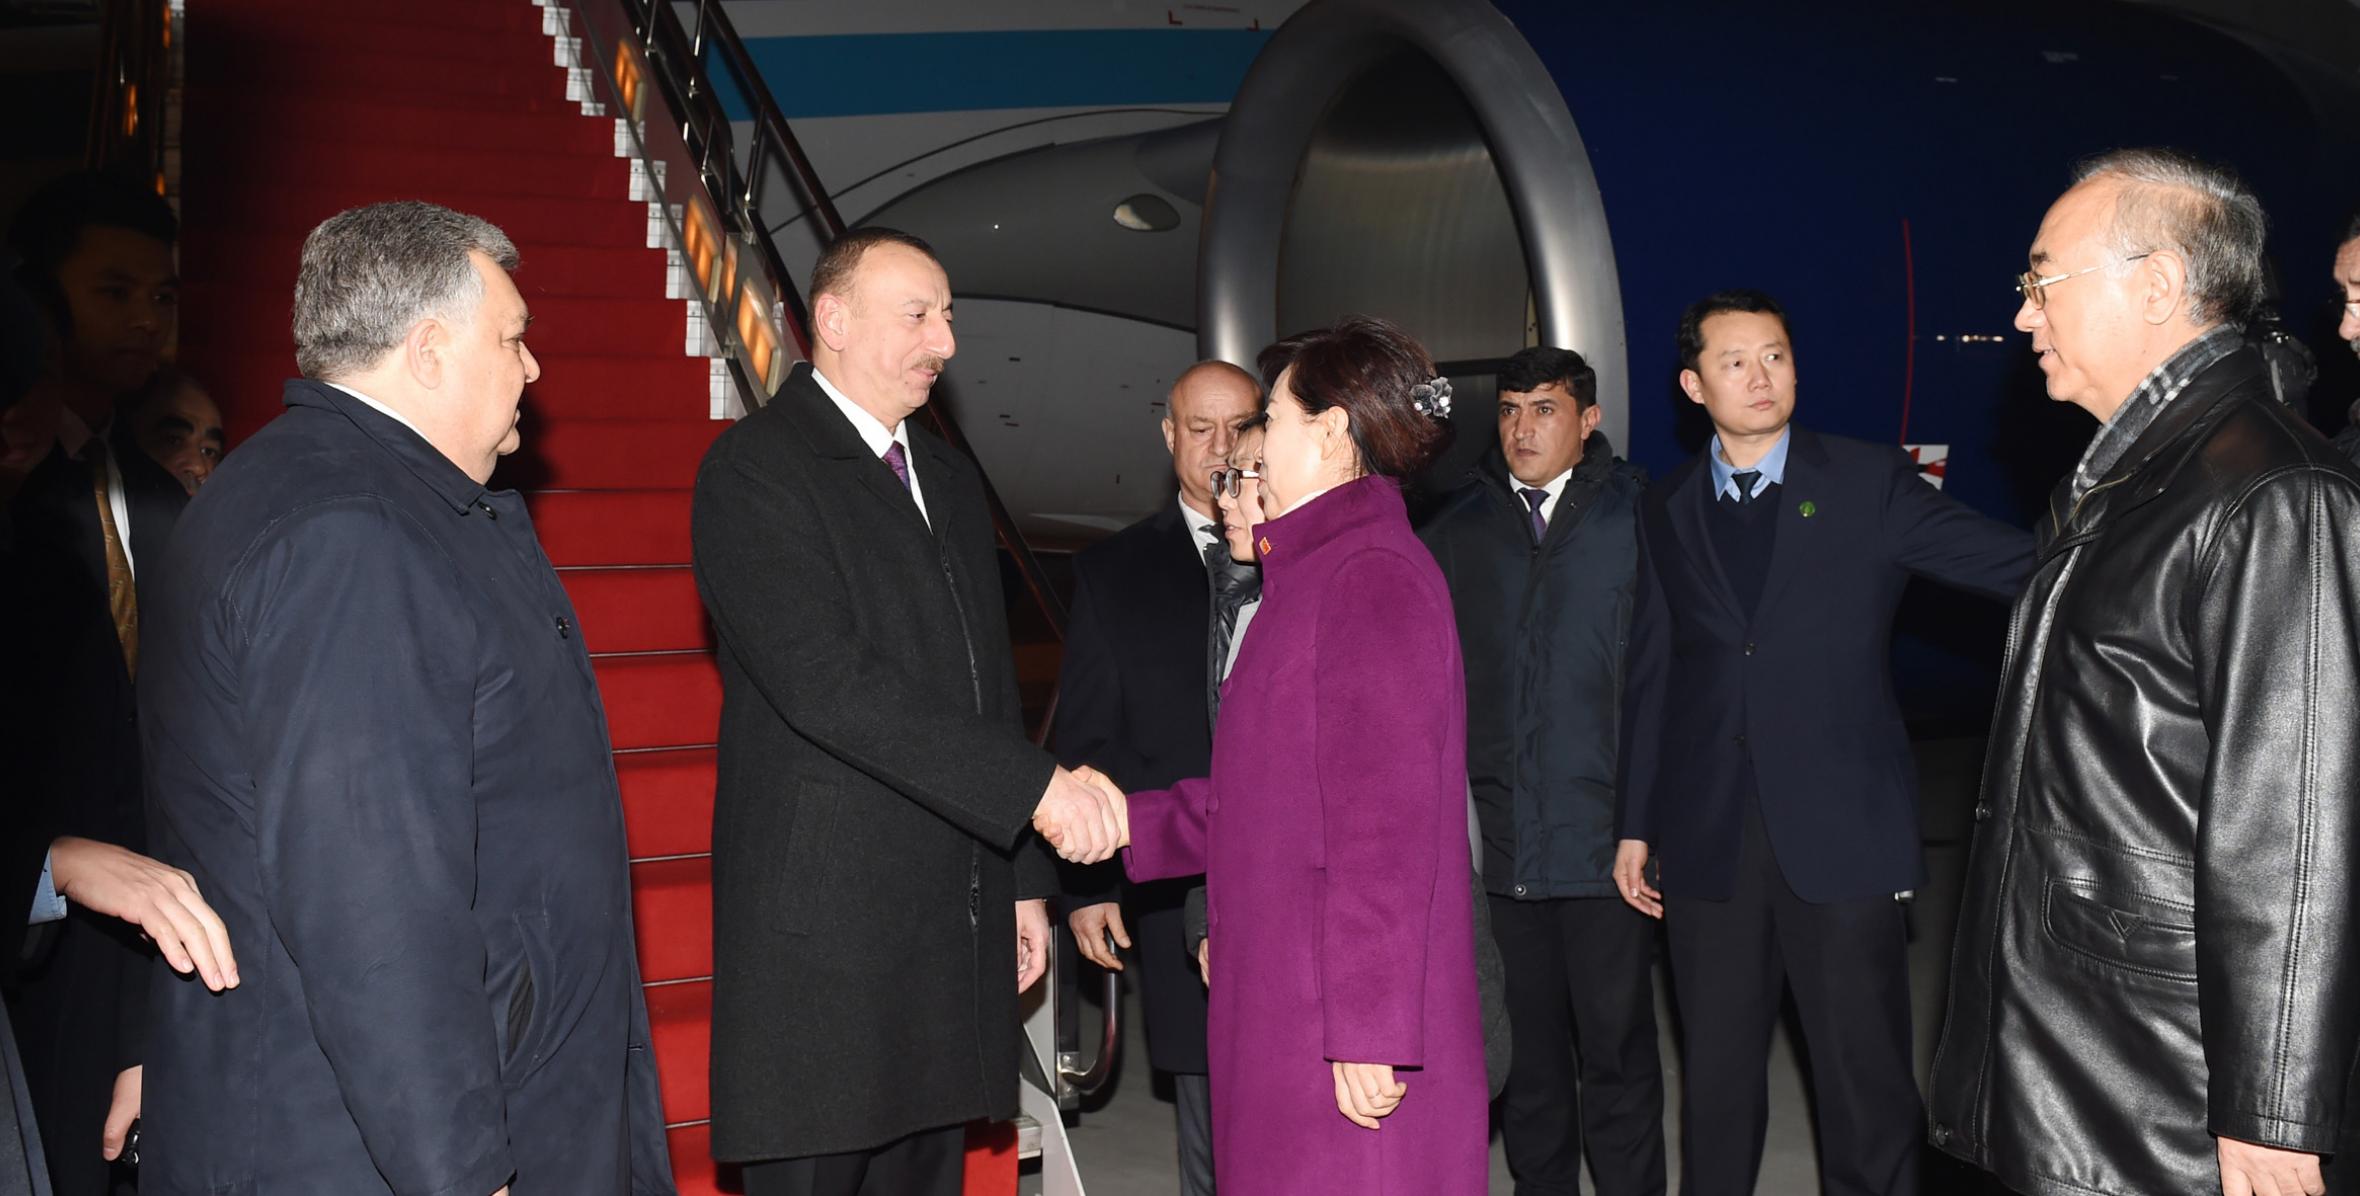 Ilham Aliyev arrived in China on a state visit